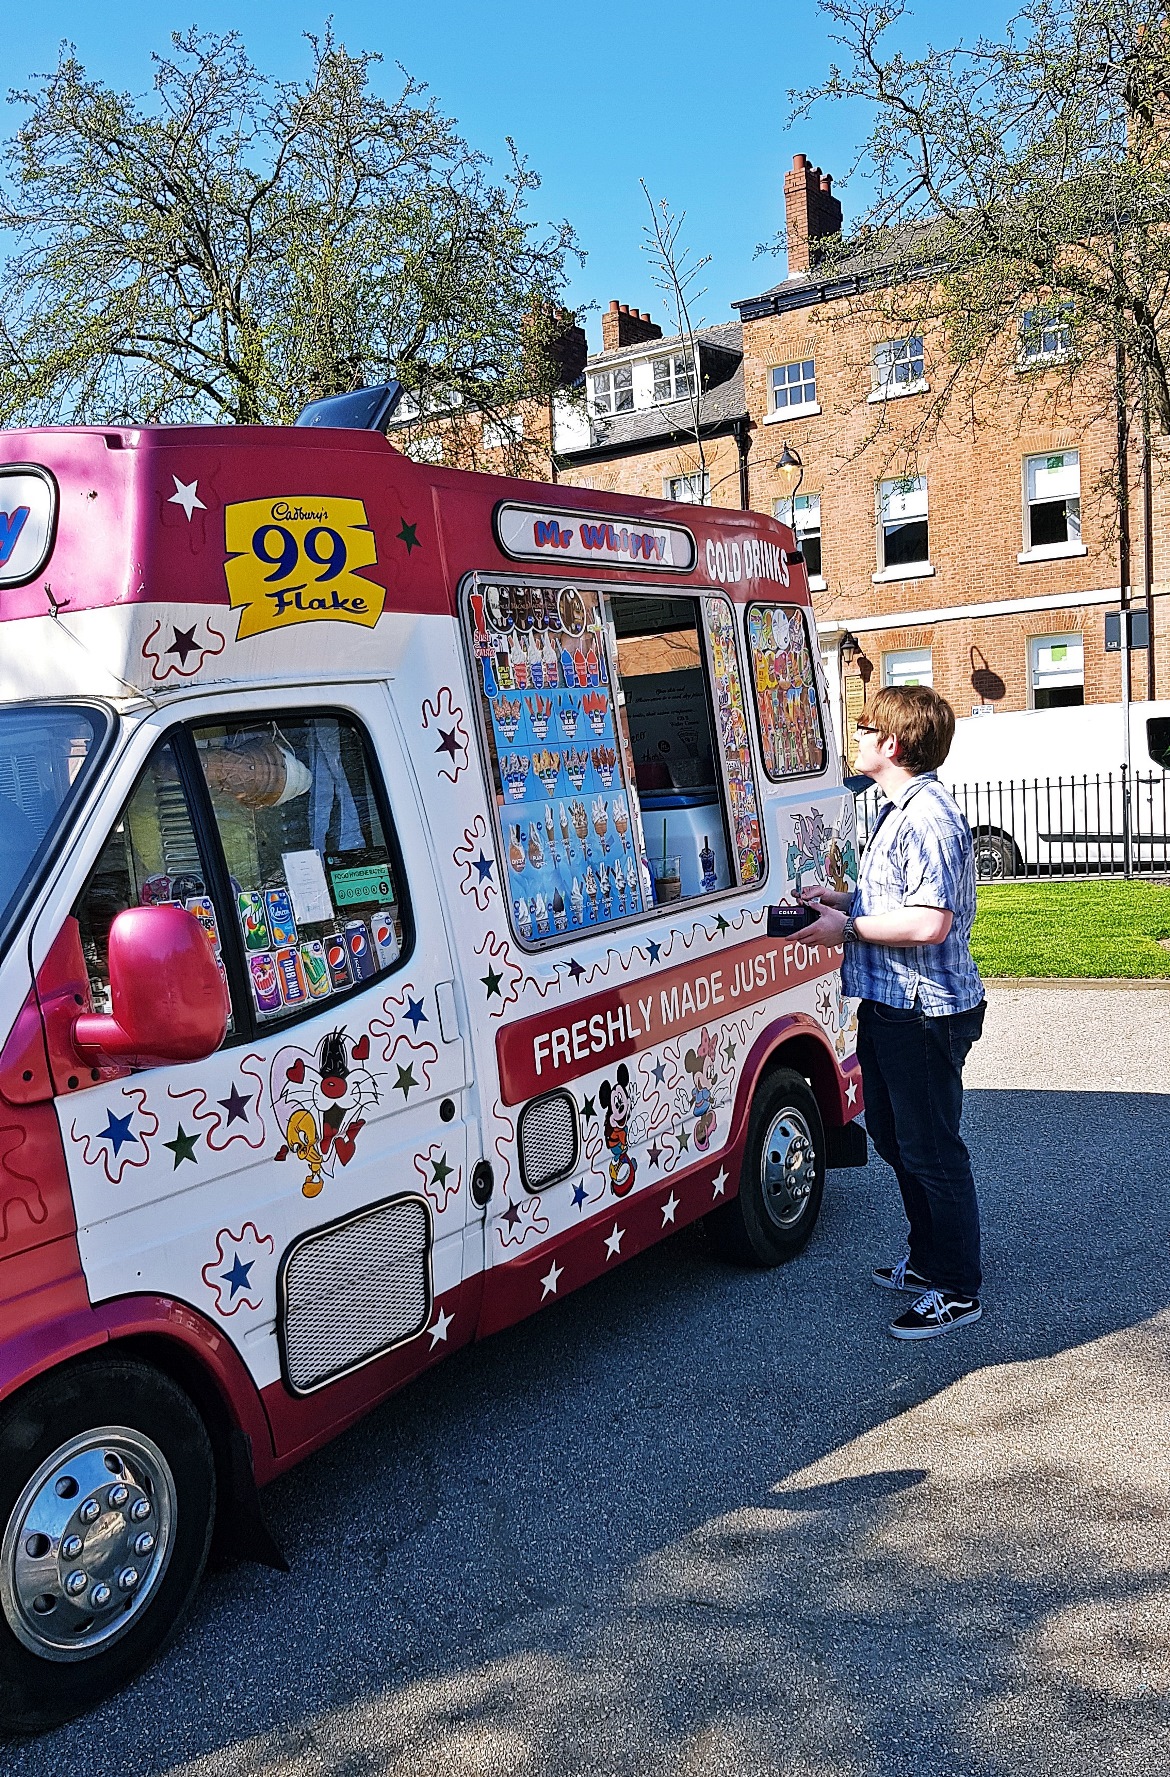 Ice cream in Park Square - Cheering Yourself up in Leeds by BeckyBecky Blogs